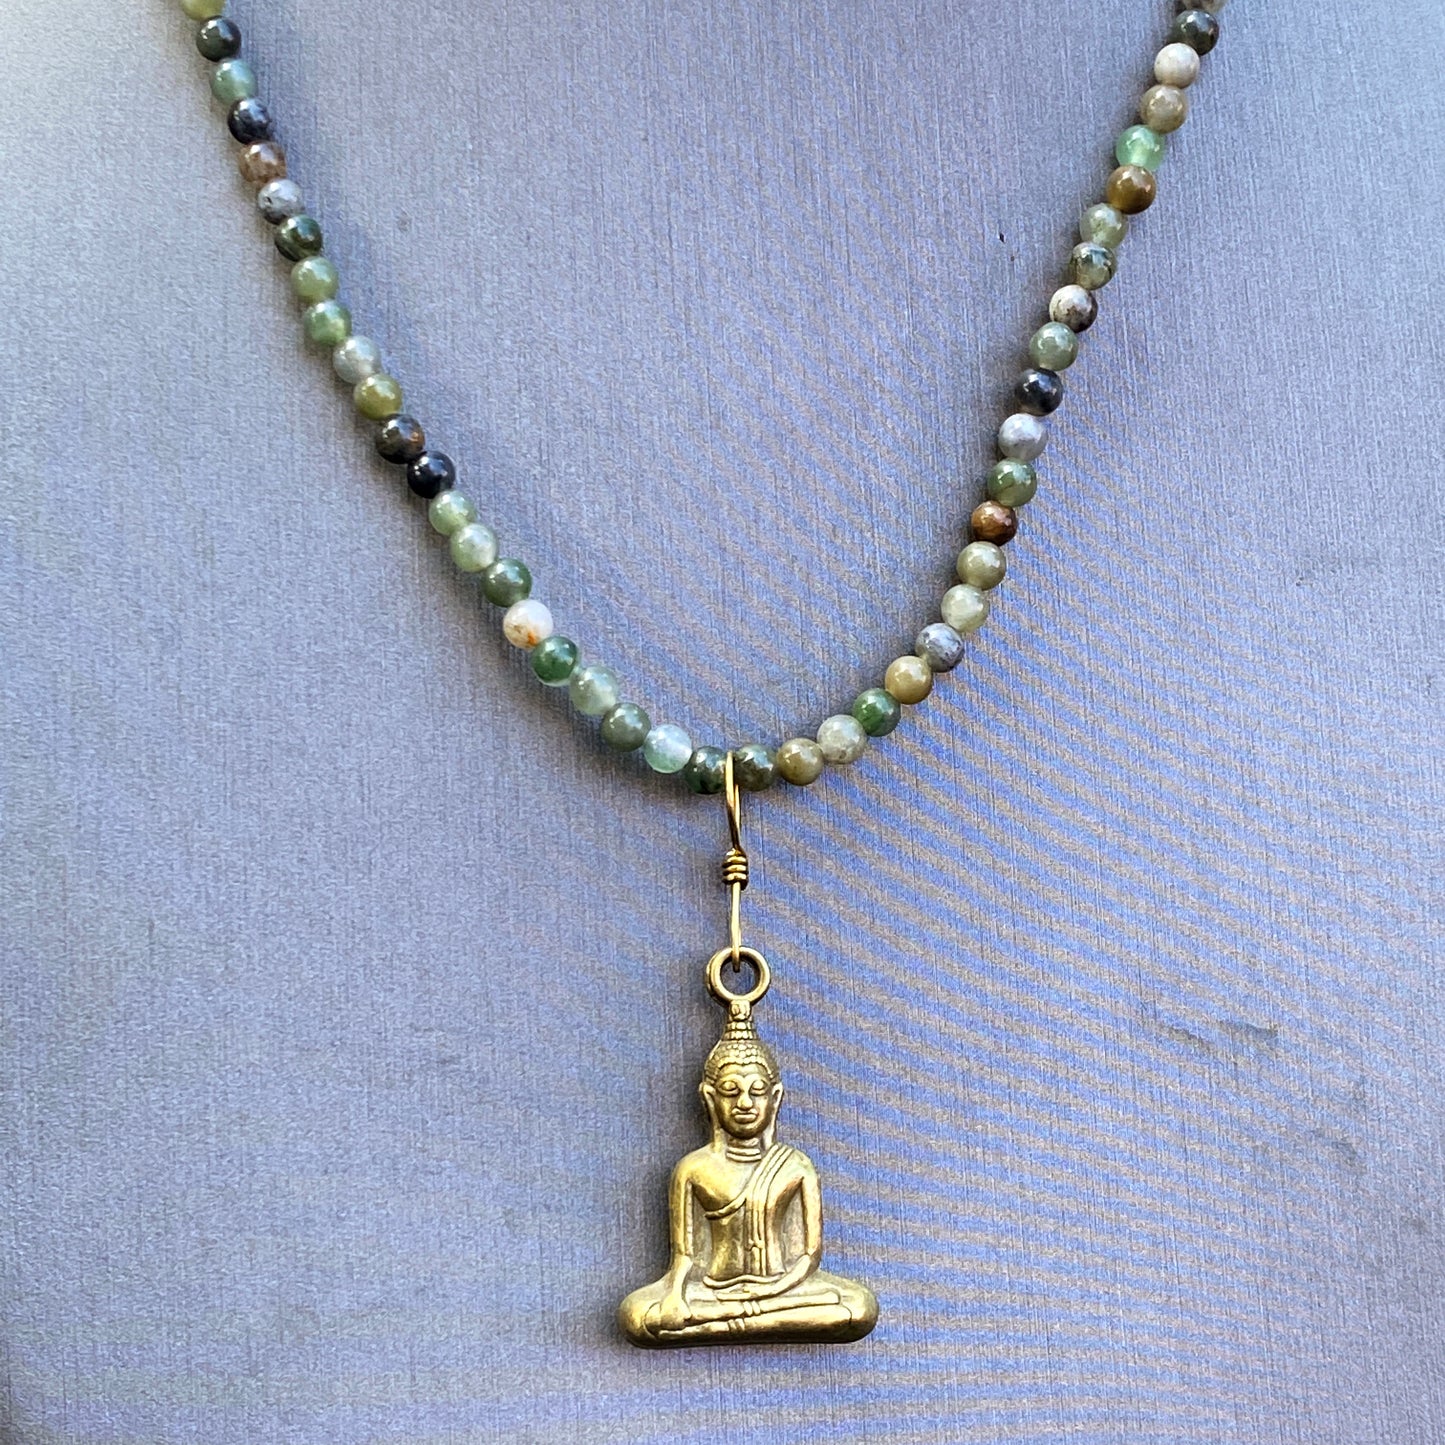 Moss agate gemstones and brass Buddha pendant necklace